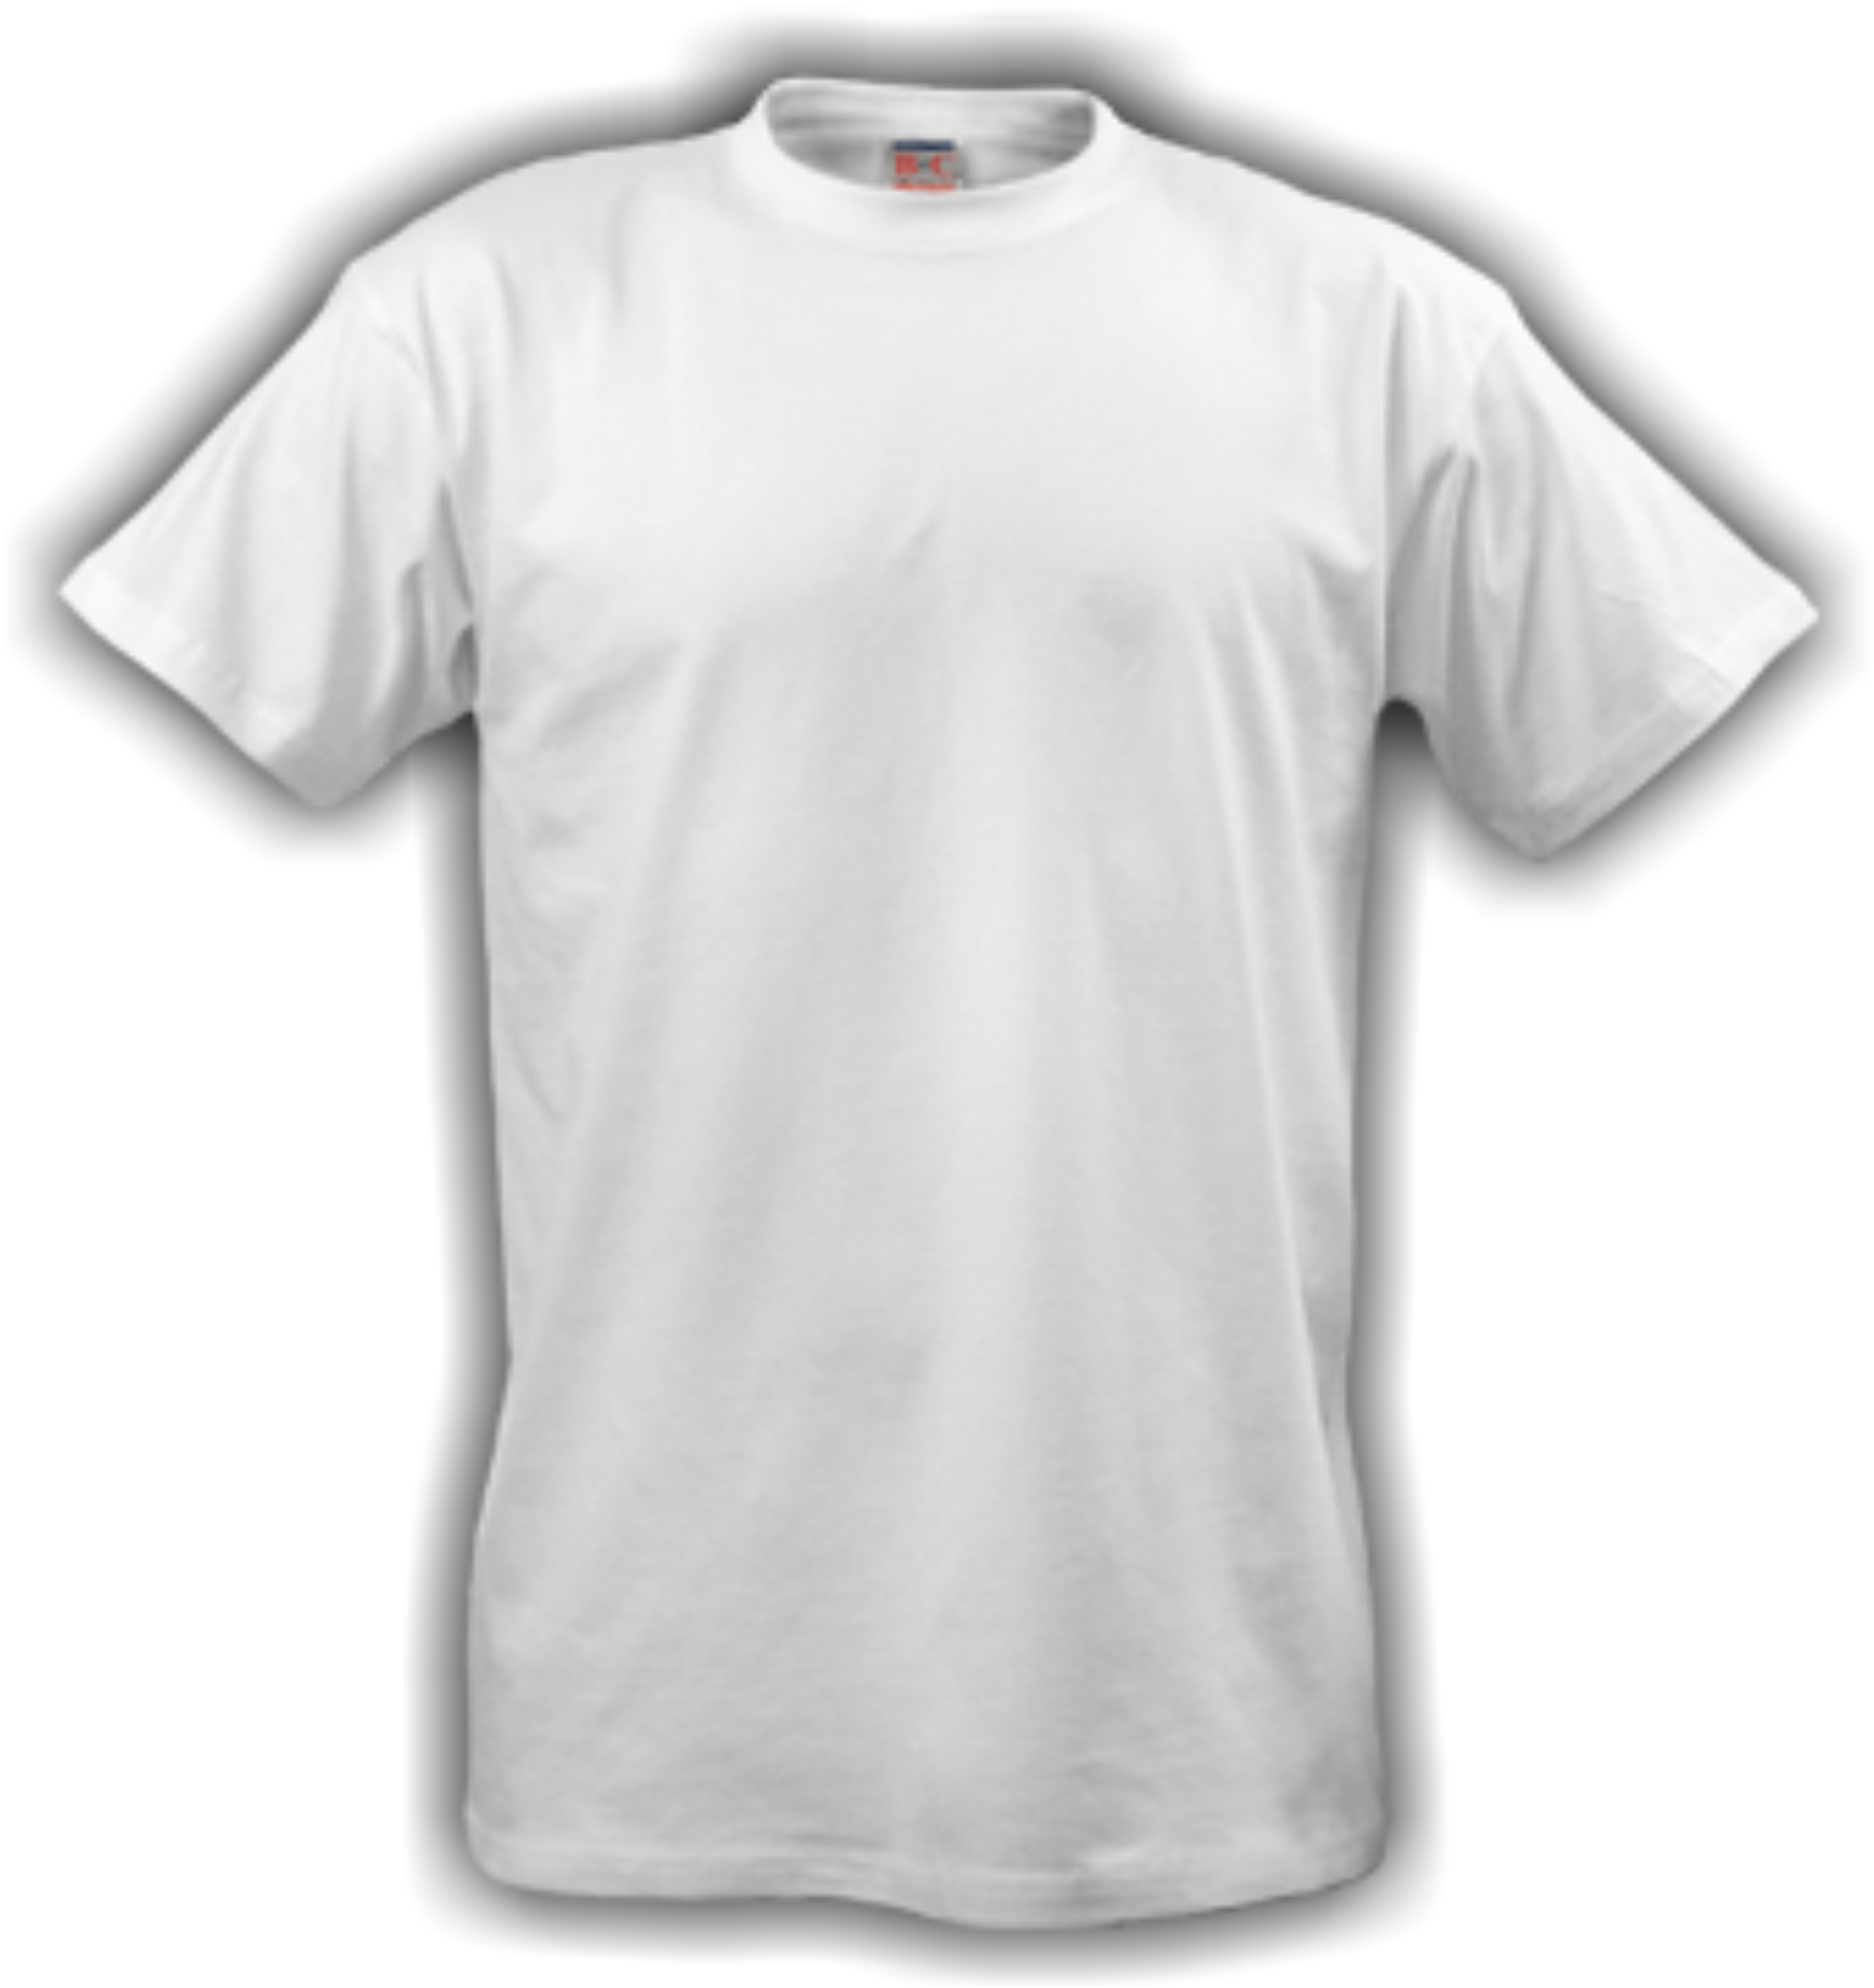 White T Shirt Template Png